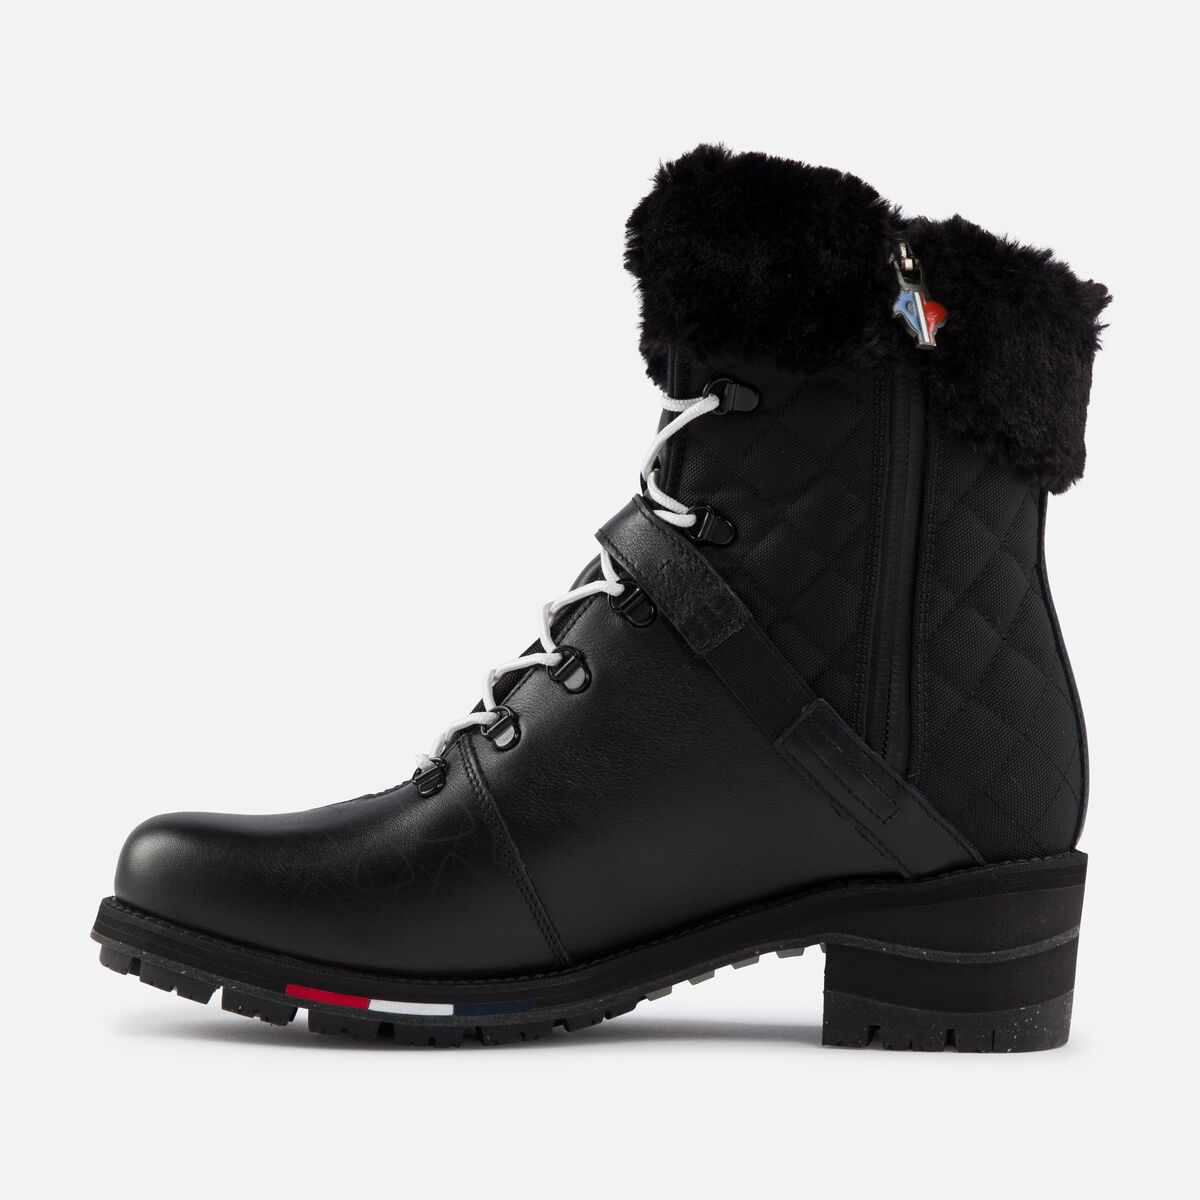 Women's 1907 Megeve Limited Editions Boots